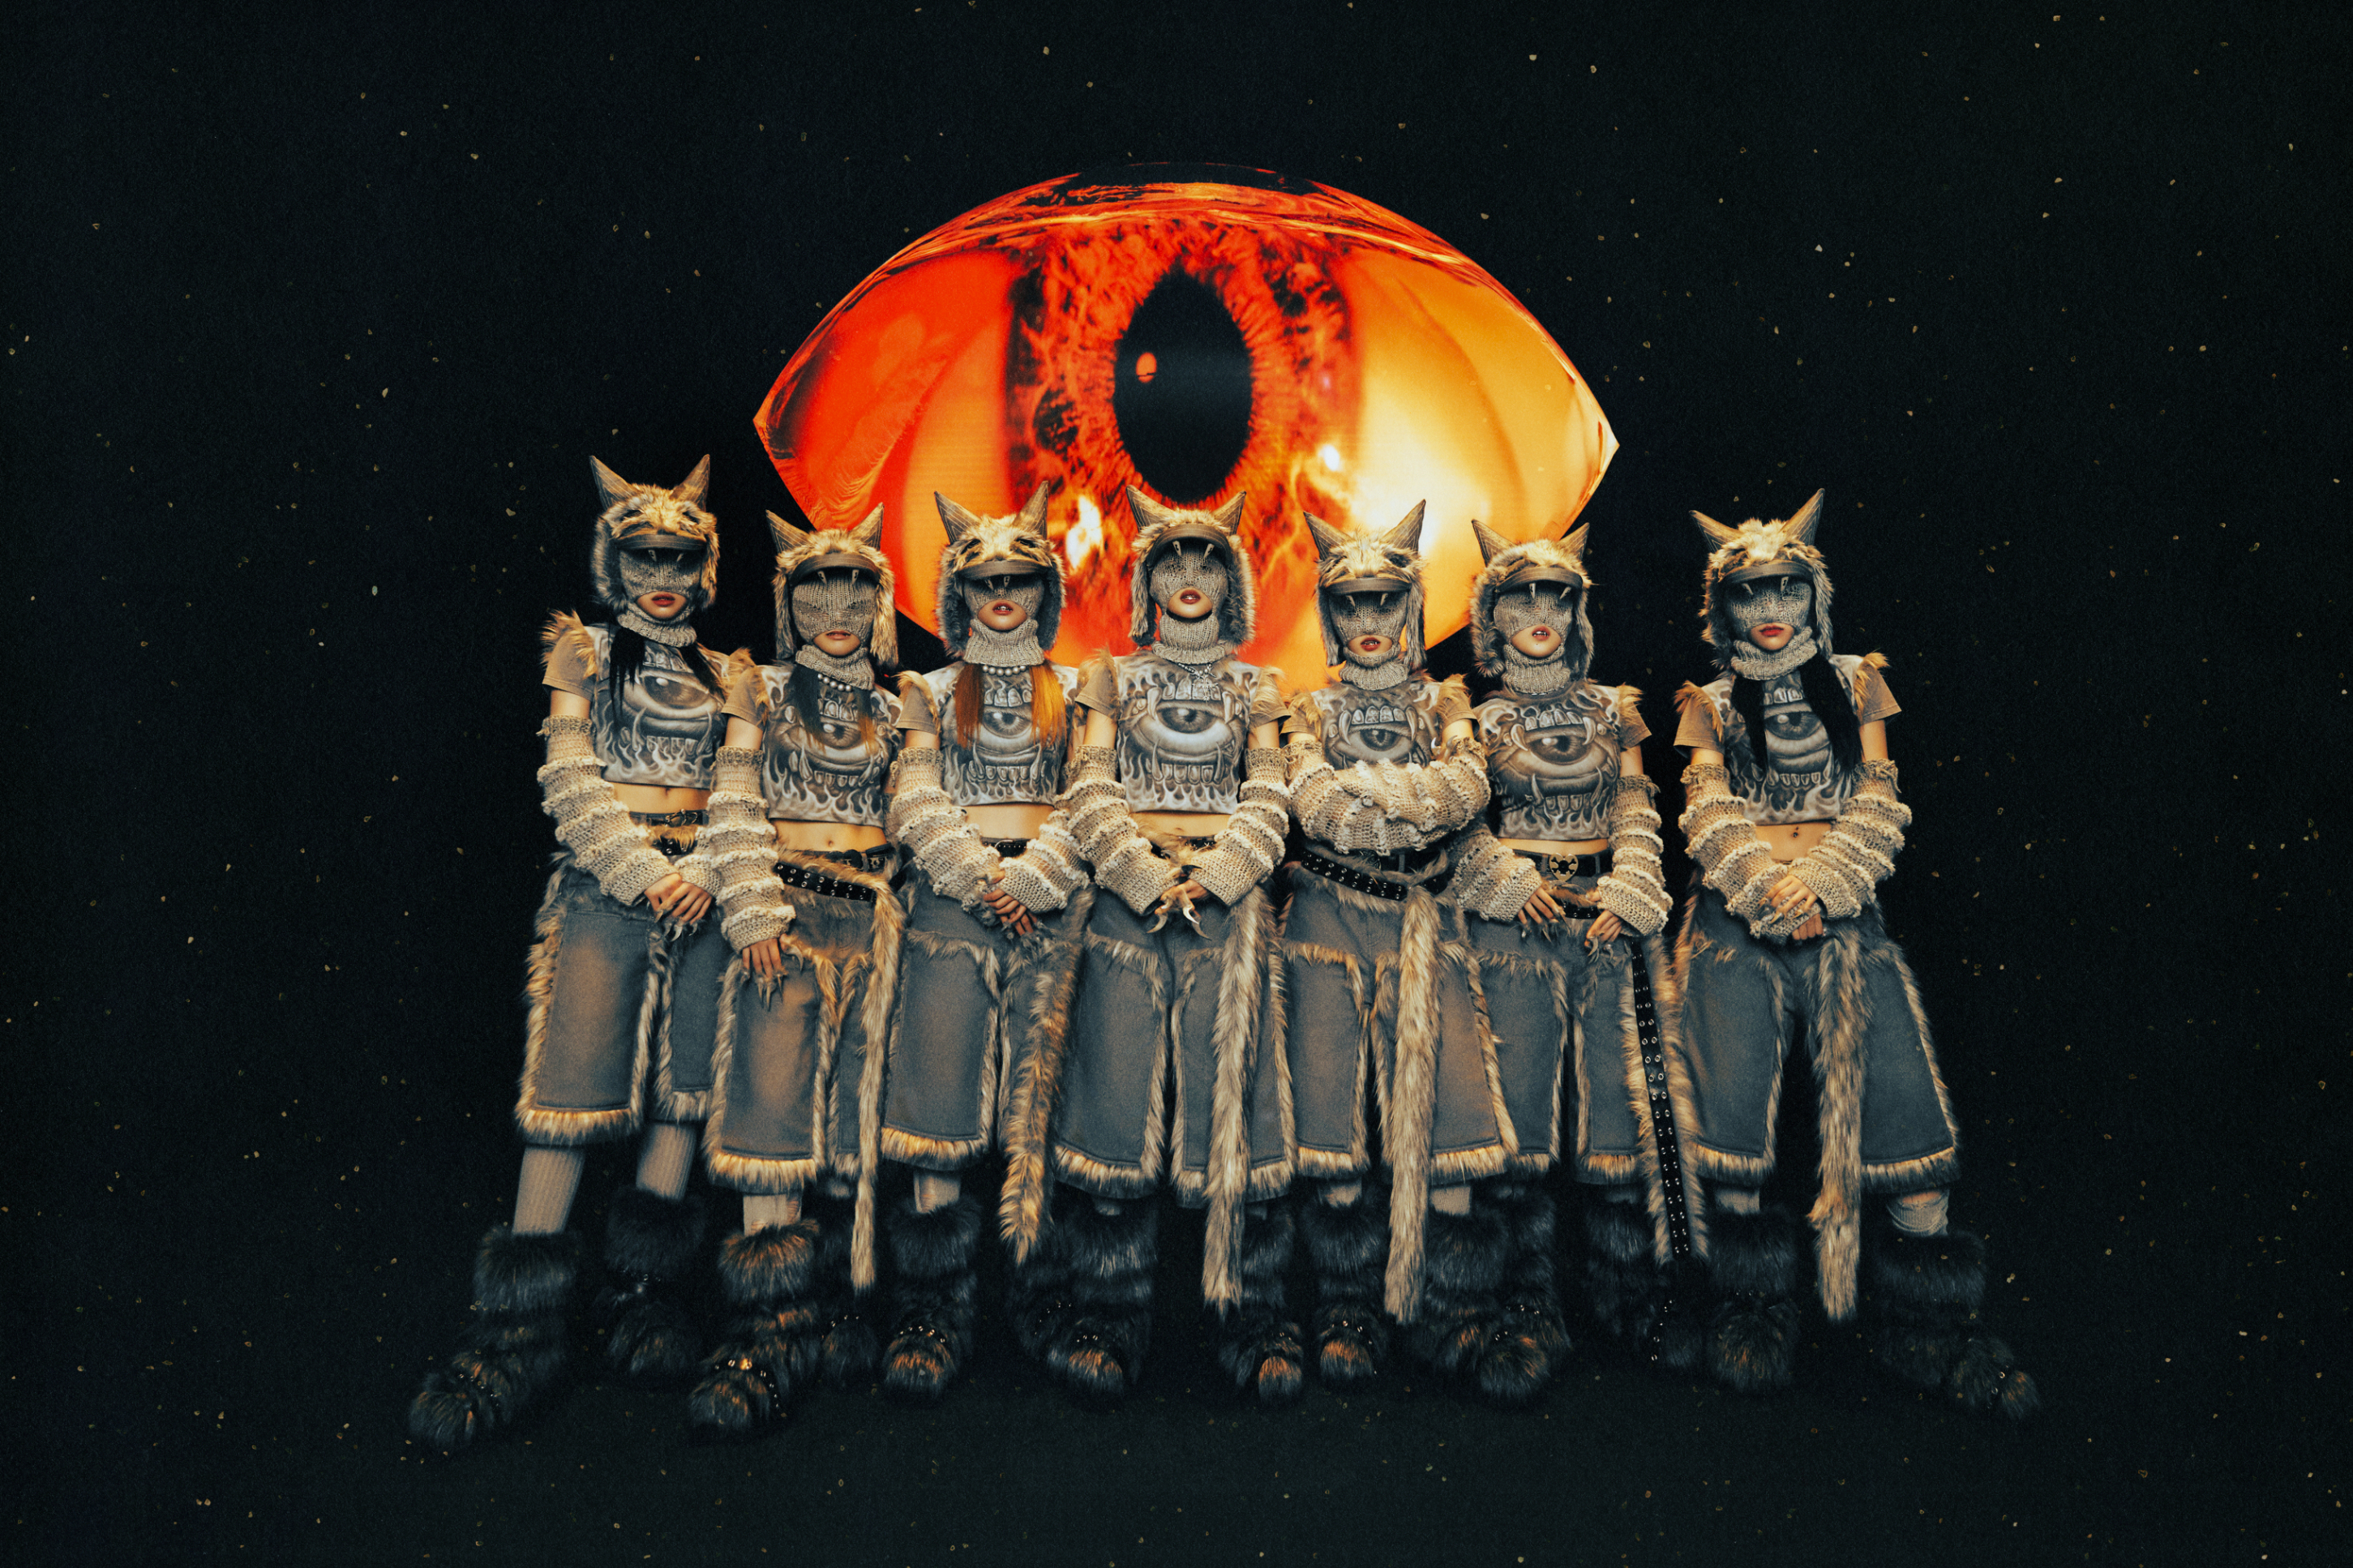 Seven people dressed in animal-themed costumes pose in front of an eye-shaped backdrop